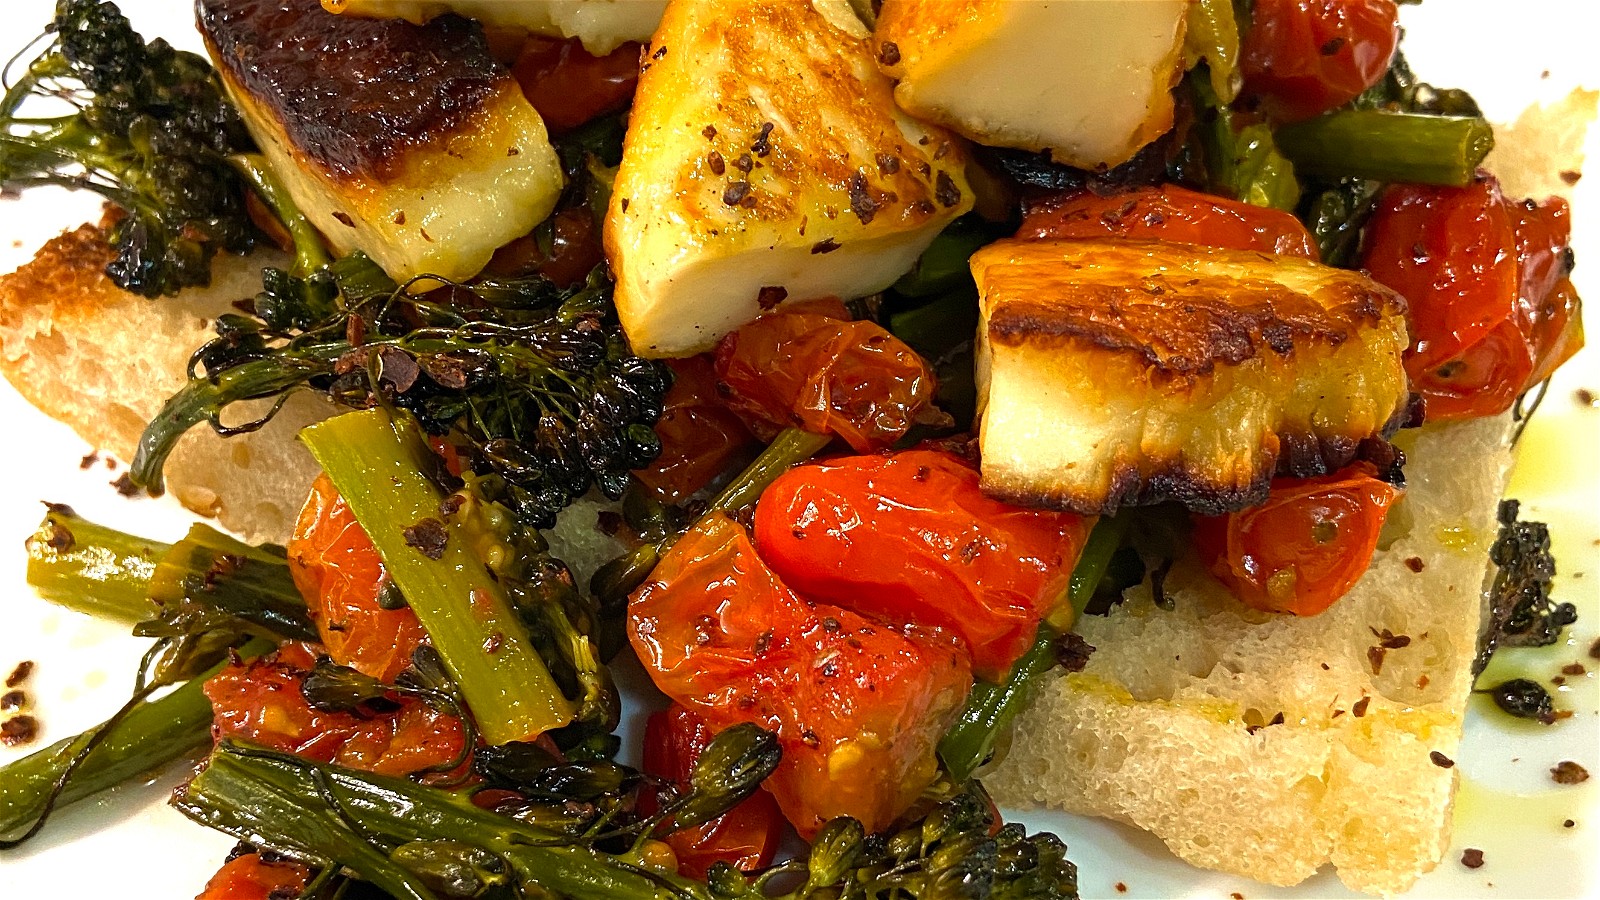 Image of Pan Fried Halloumi with Broccolini and Tomatoes